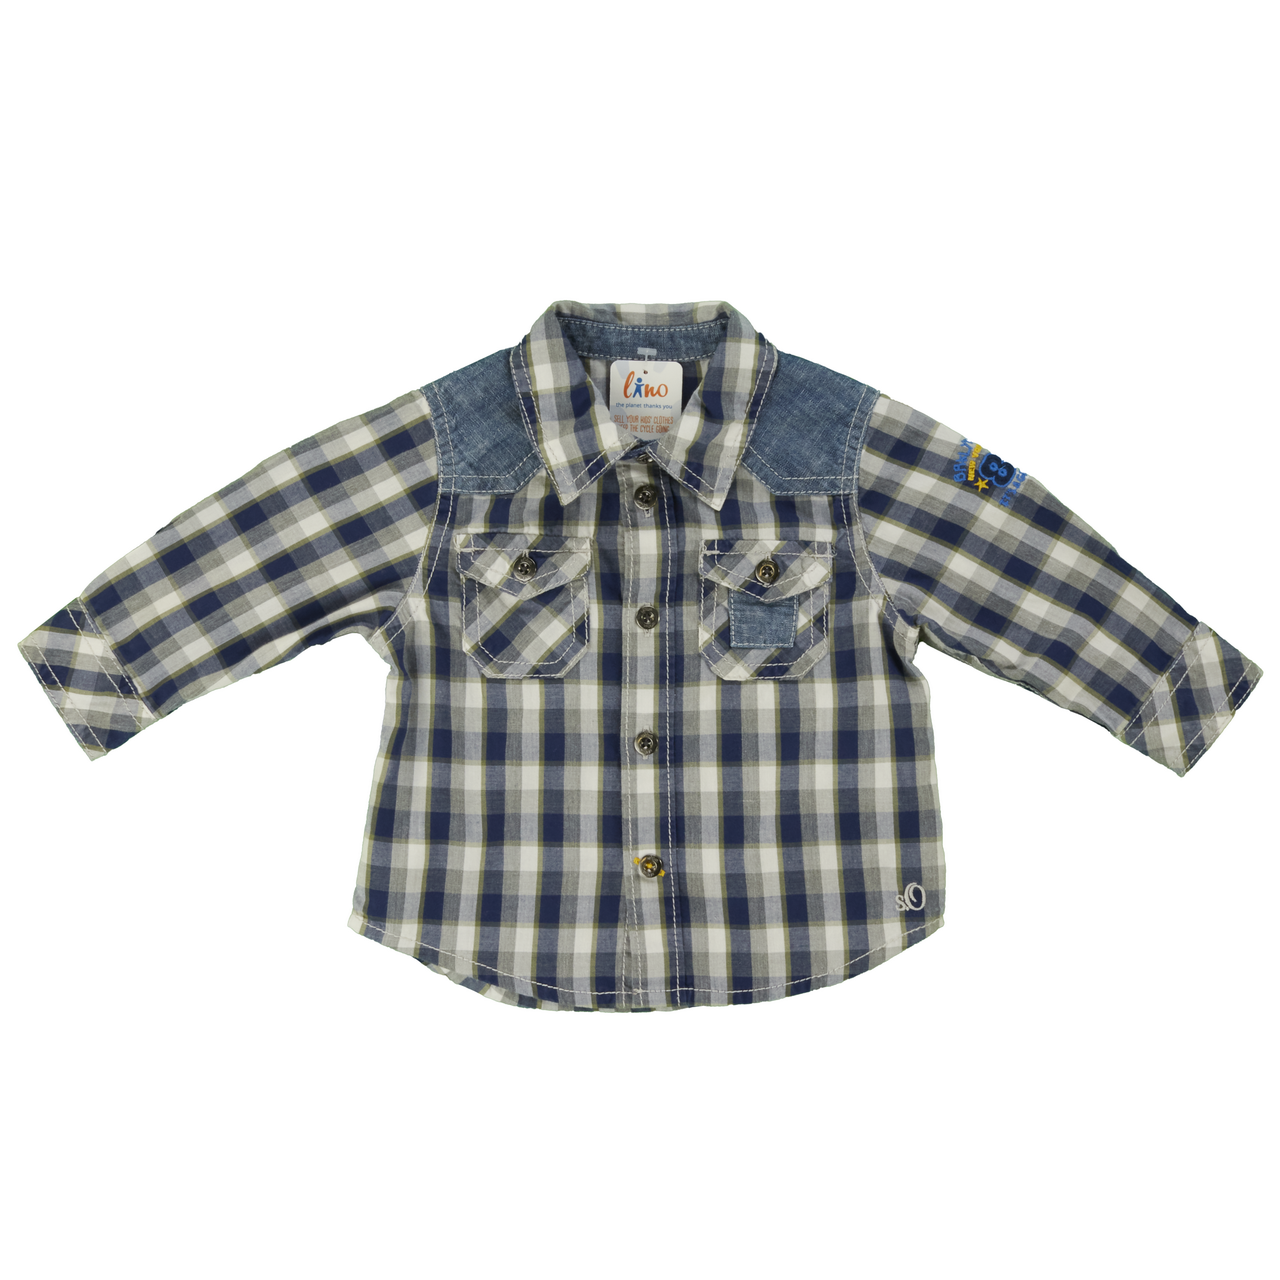 s. Oliver Kids Clothing Reconditioned - Second-Hand for